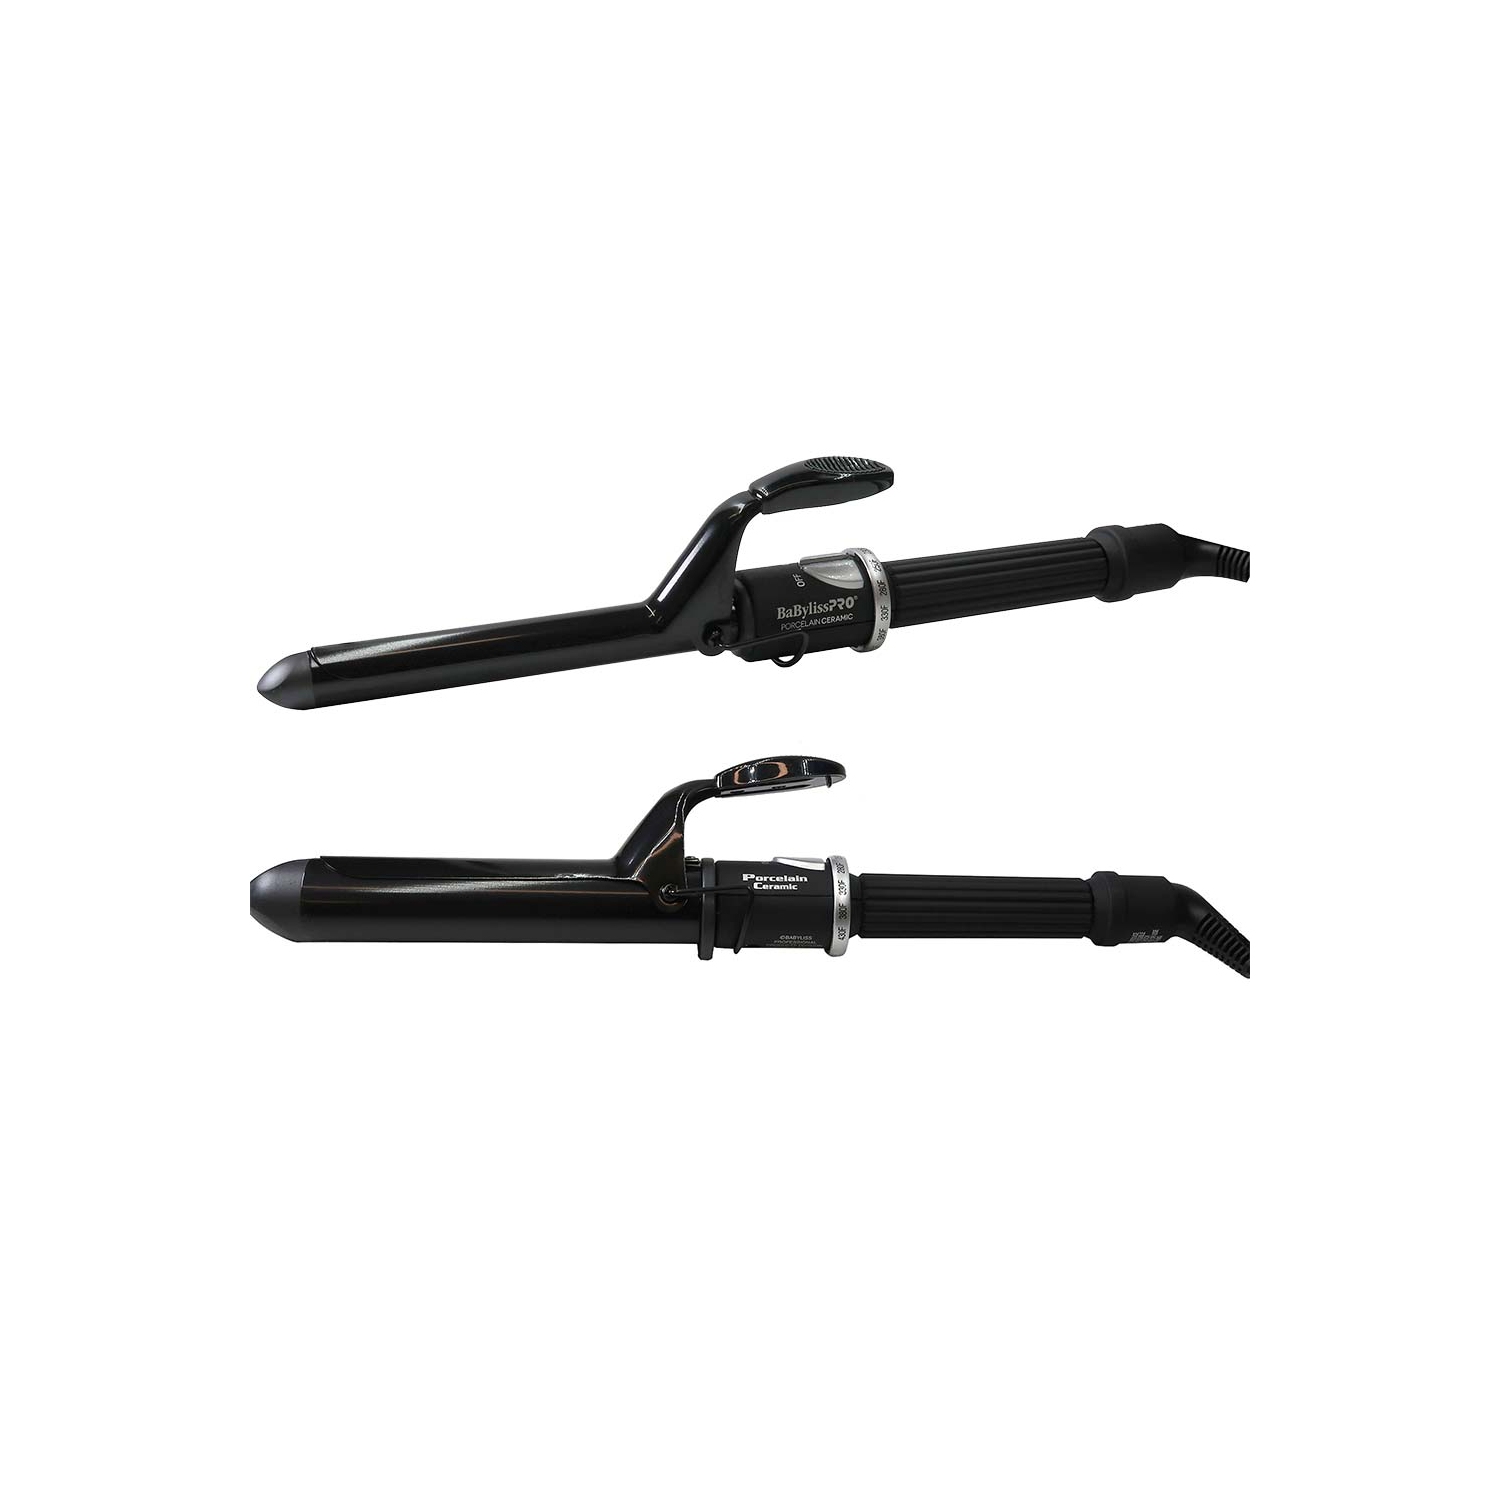 BaByliss Pro Porcelain Ceramic 3/4" Curling Iron with 1 ¼" Curling Iron